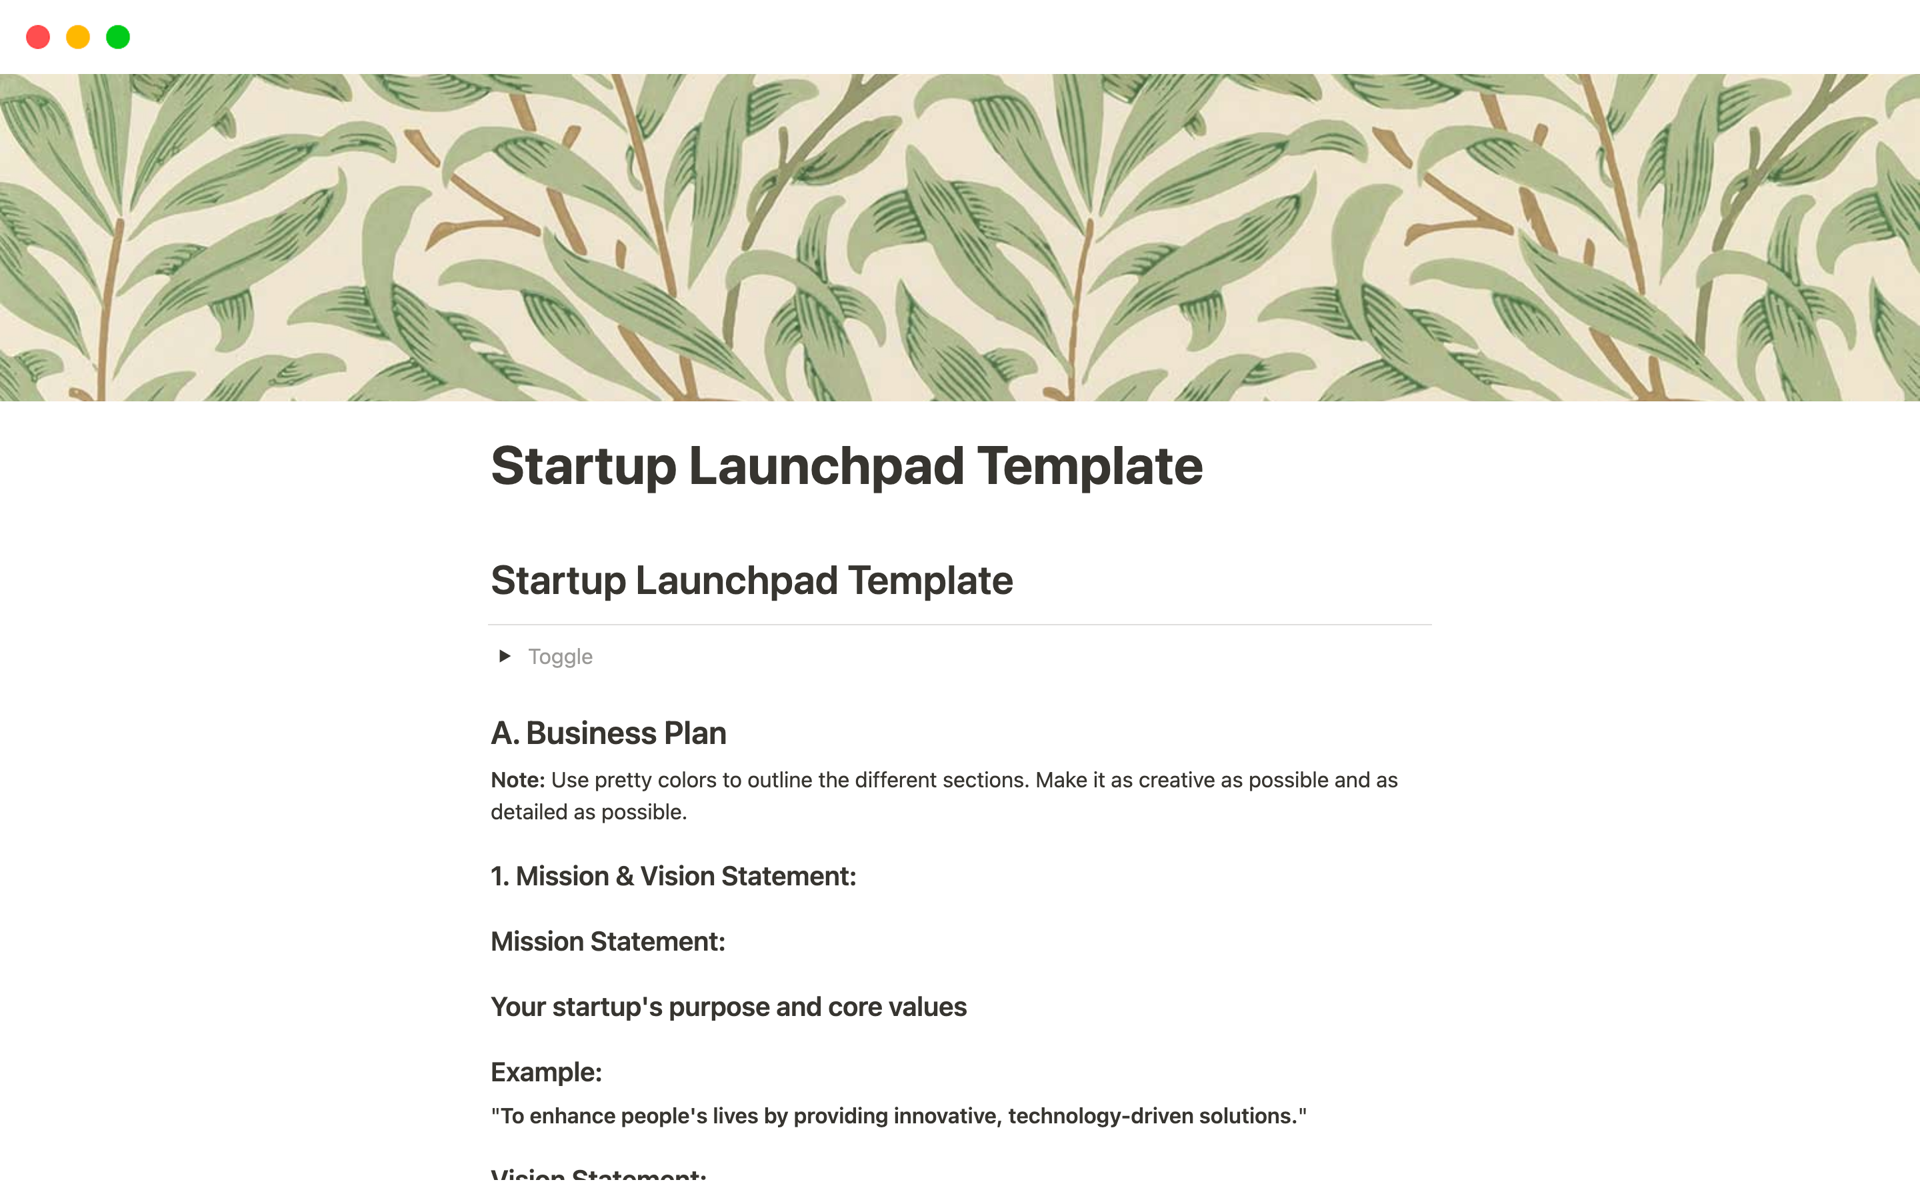 A template preview for Startup Launchpad